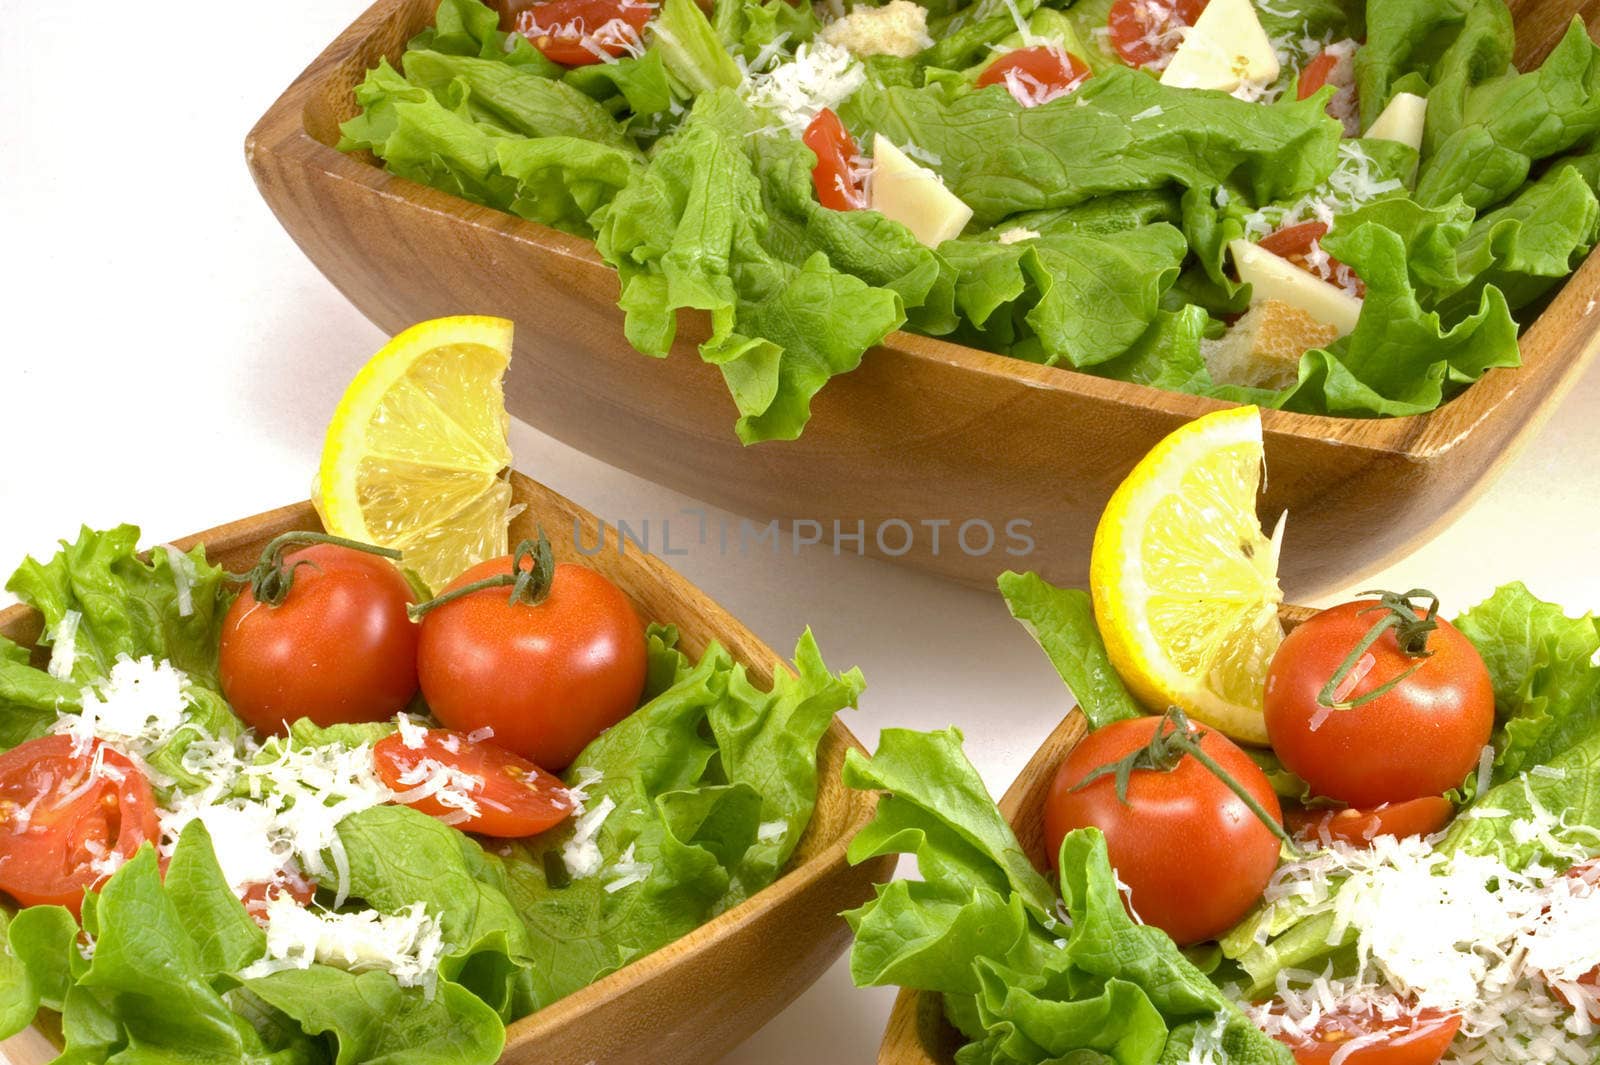 A free salad of lettuce, tomatoes, and cheese in wooden bowls.